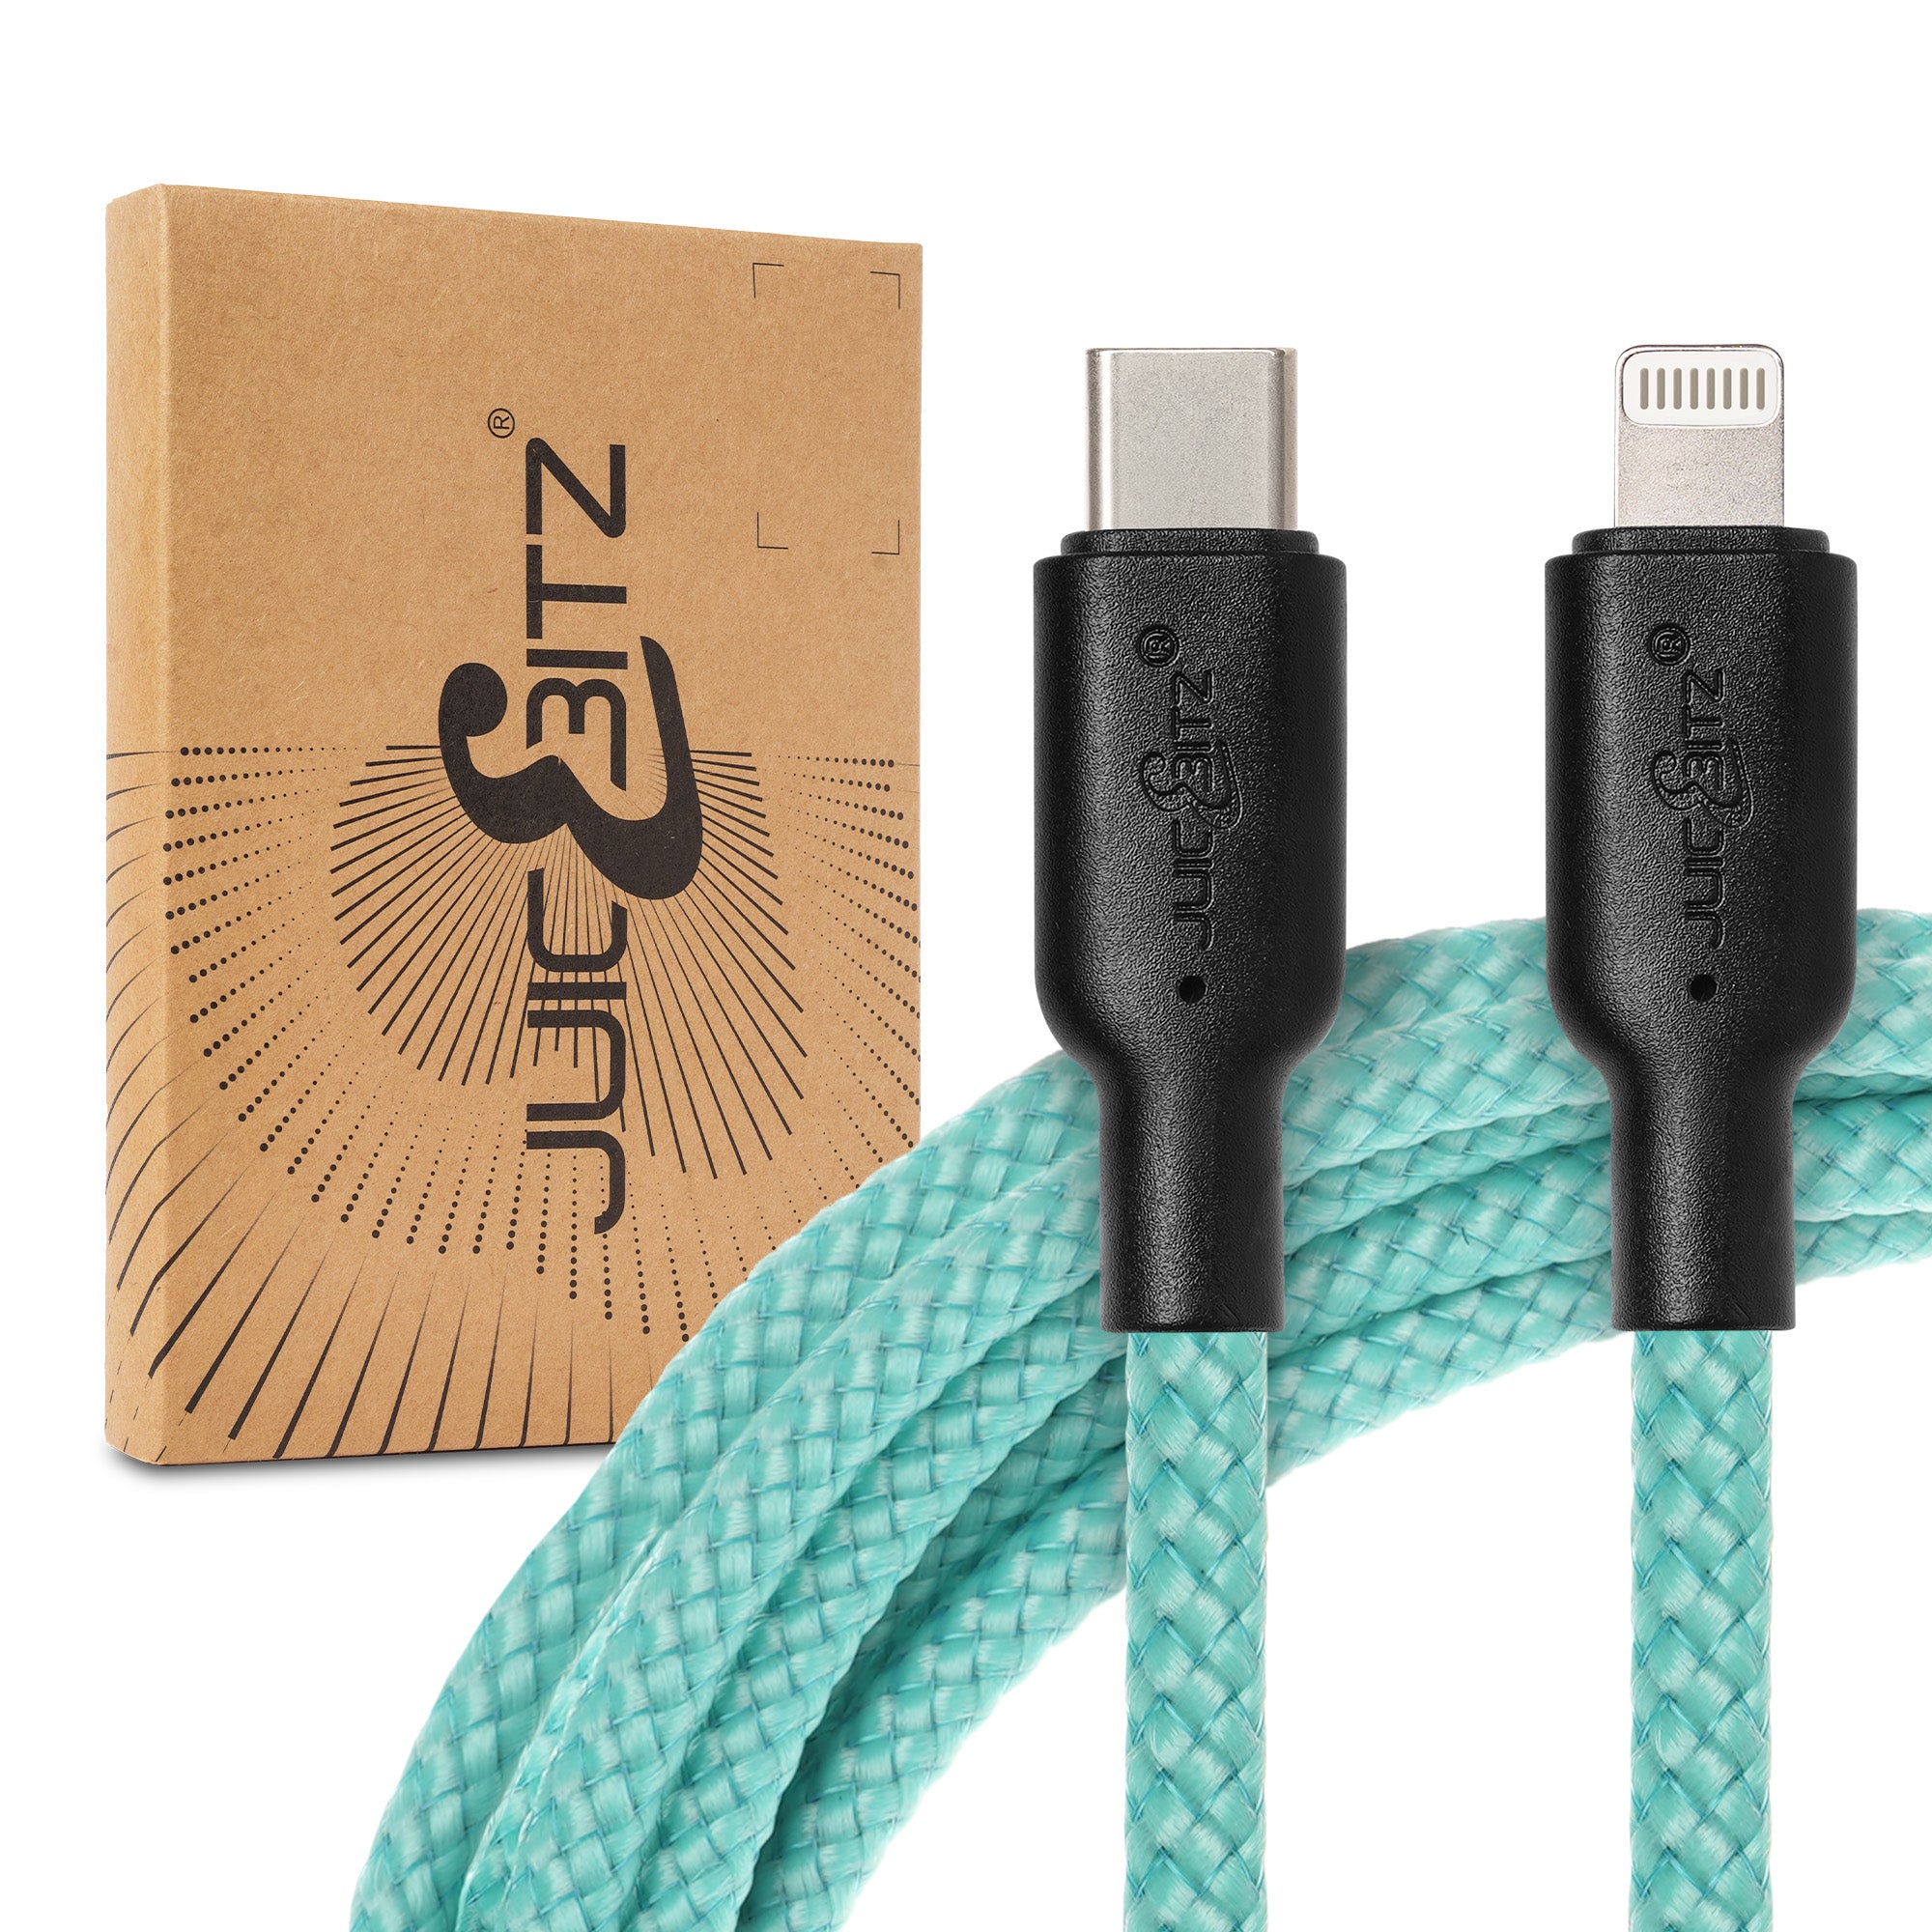 Braided Heavy Duty USB-C Fast Charger Data Sync Cable for iPhone, iPad, iPod - Turquoise